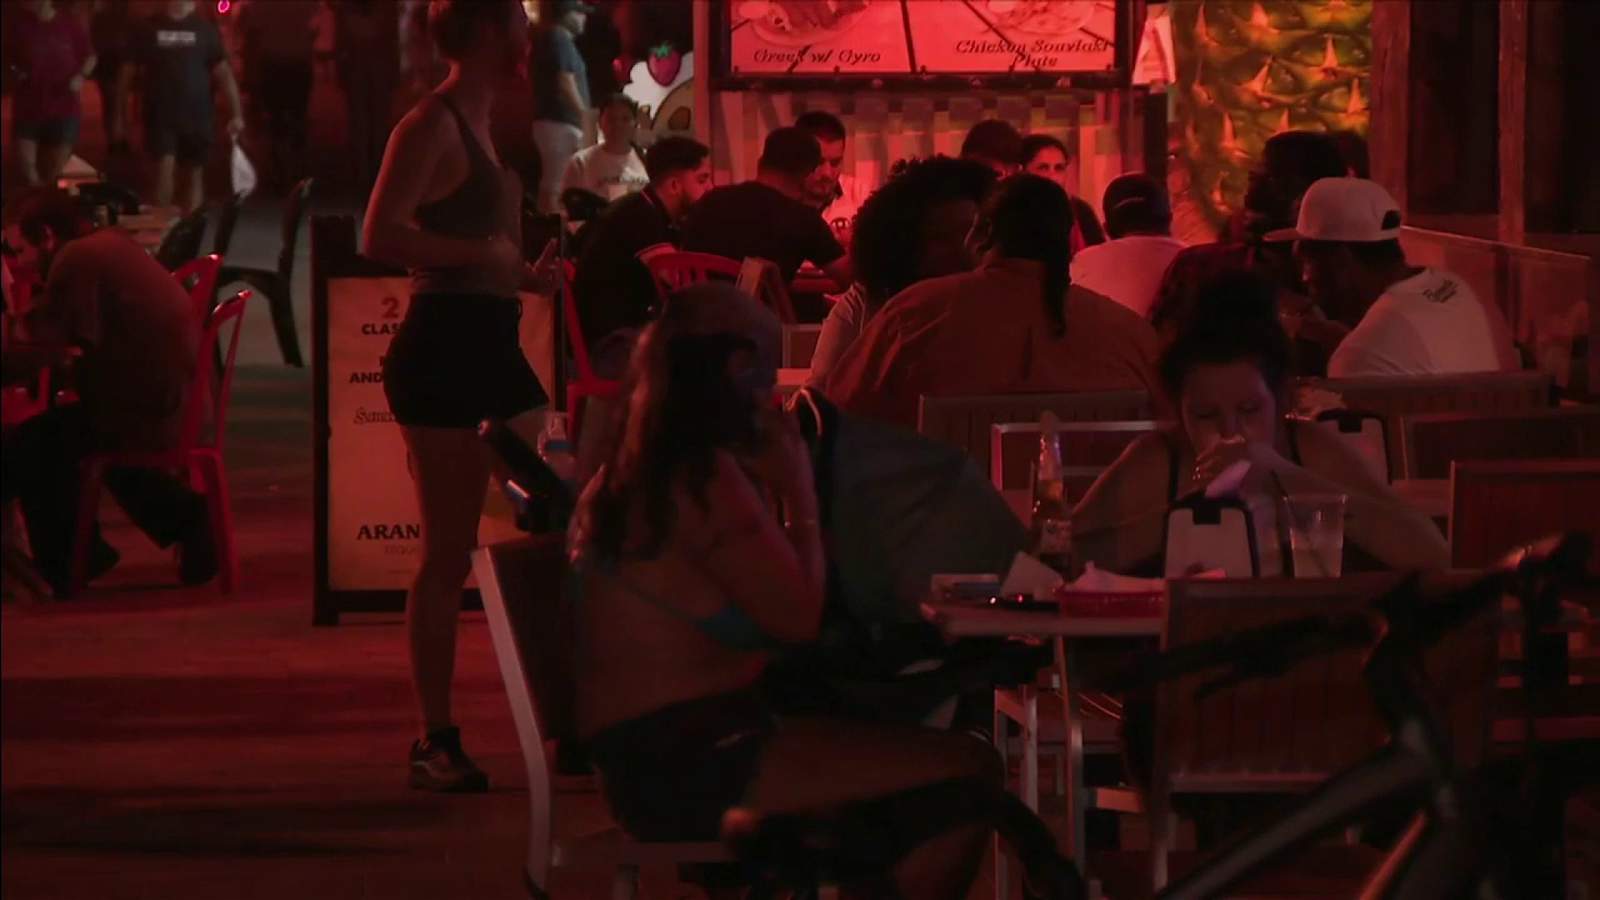 Café zones set up in Hollywood add more outdoor seating, more social distancing